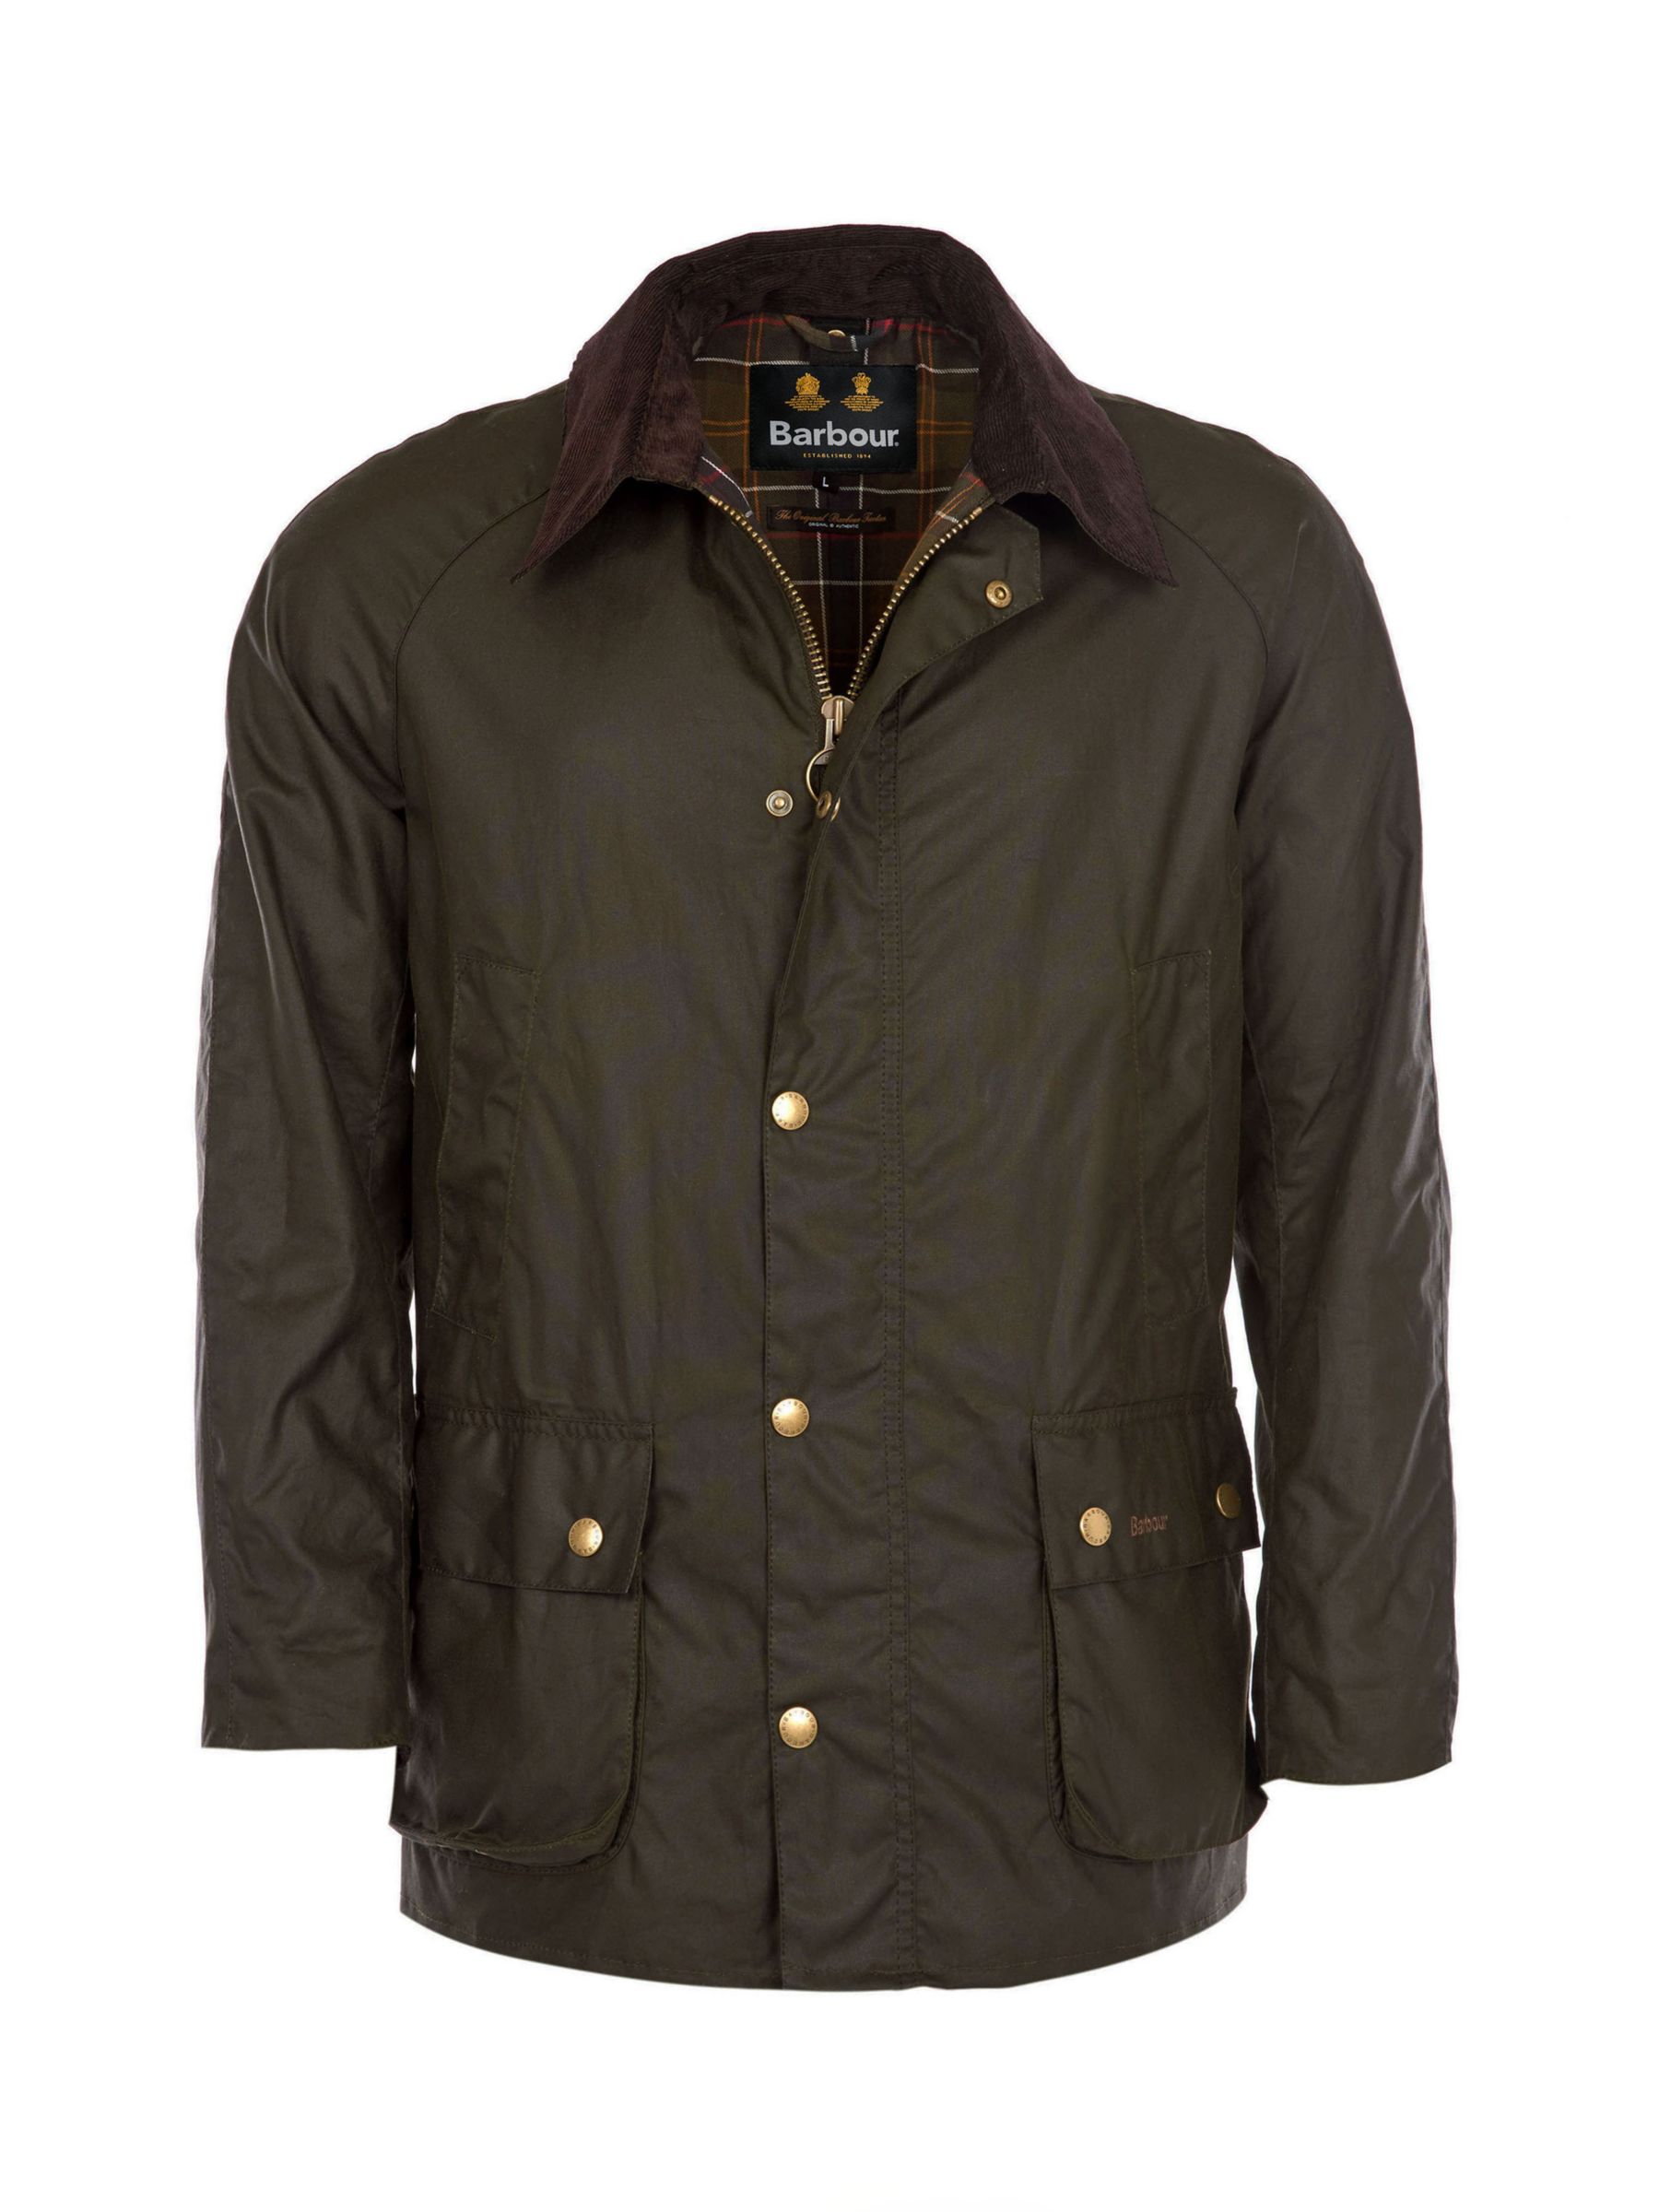 Barbour Lifestyle Ashby Waxed Cotton Field Jacket, Olive at John Lewis ...